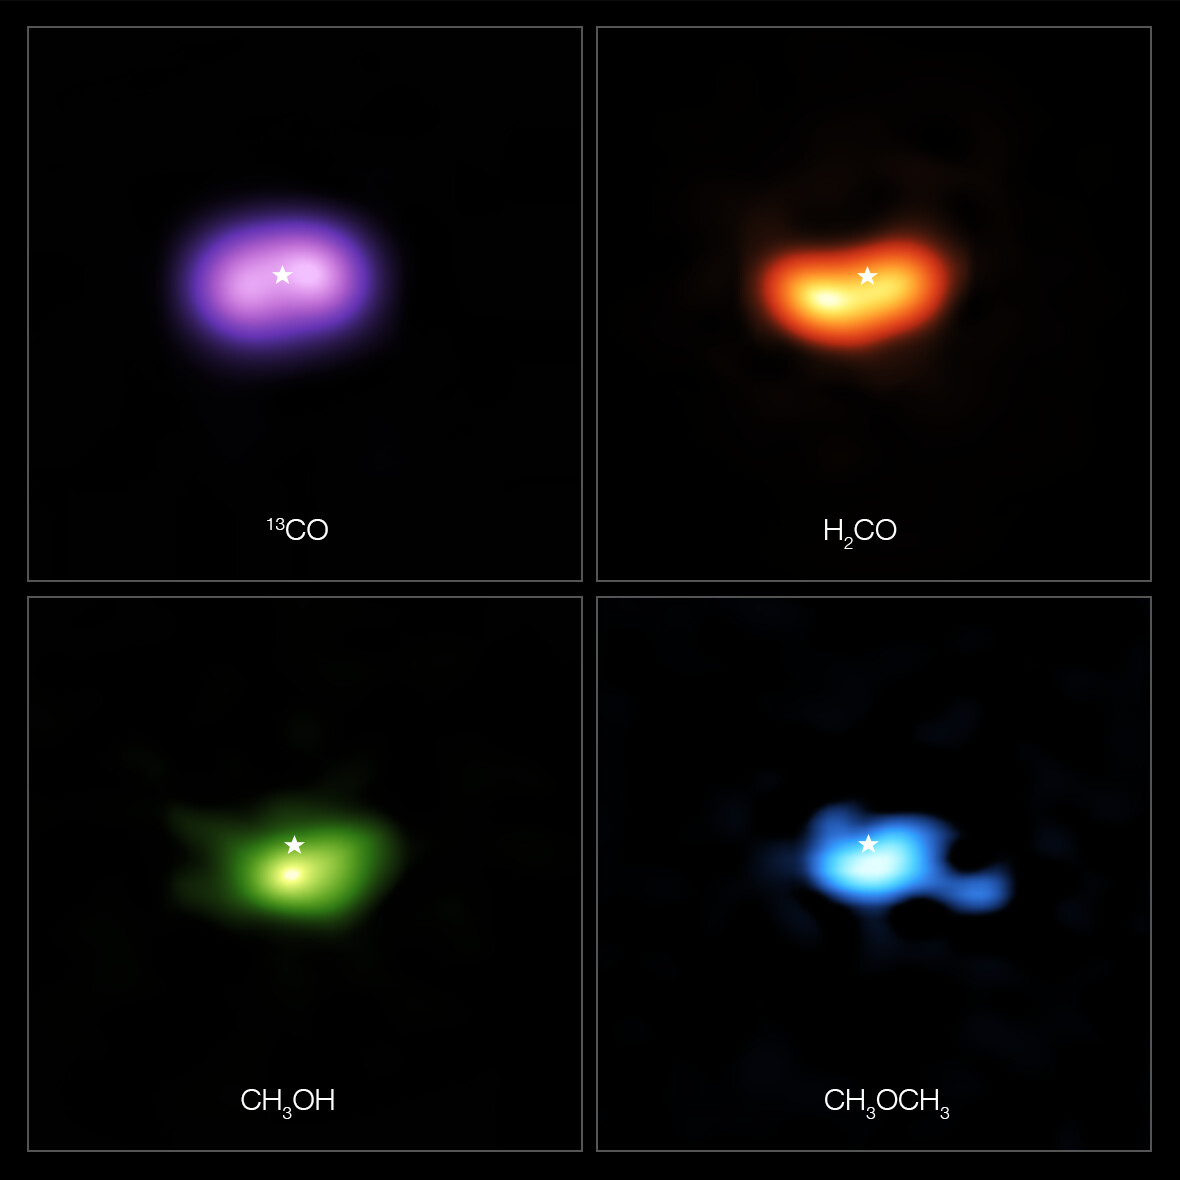 These images from the Atacama Large Millimeter/submillimeter Array (ALMA) show where various gas molecules were found in the disc around the IRS 48 star, also known as Oph-IRS 48. The disc contains a cashew-nut-shaped region in its southern part, which traps millimetre-sized dust grains that can come together and grow into kilometre-sized objects like comets, asteroids and potentially even planets. Recent observations spotted several complex organic molecules in this region, including formaldehyde (H2CO; orange), methanol (CH3OH; green) and dimethyl ether (CH3OCH3; blue), the last being the largest molecule found in a planet-forming disc to date. The emission signaling the presence of these molecules is clearly stronger in the disc’s dust trap, while carbon monoxide gas (CO; purple) is present in the entire gas disc. The location of the central star is marked with a star in all four images. The dust trap is about the same size as the area taken up by the methanol emission, shown on the bottom left. Credit: ALMA (ESO/NAOJ/NRAO)/A. Pohl, van der Marel et al., Brunken et al.